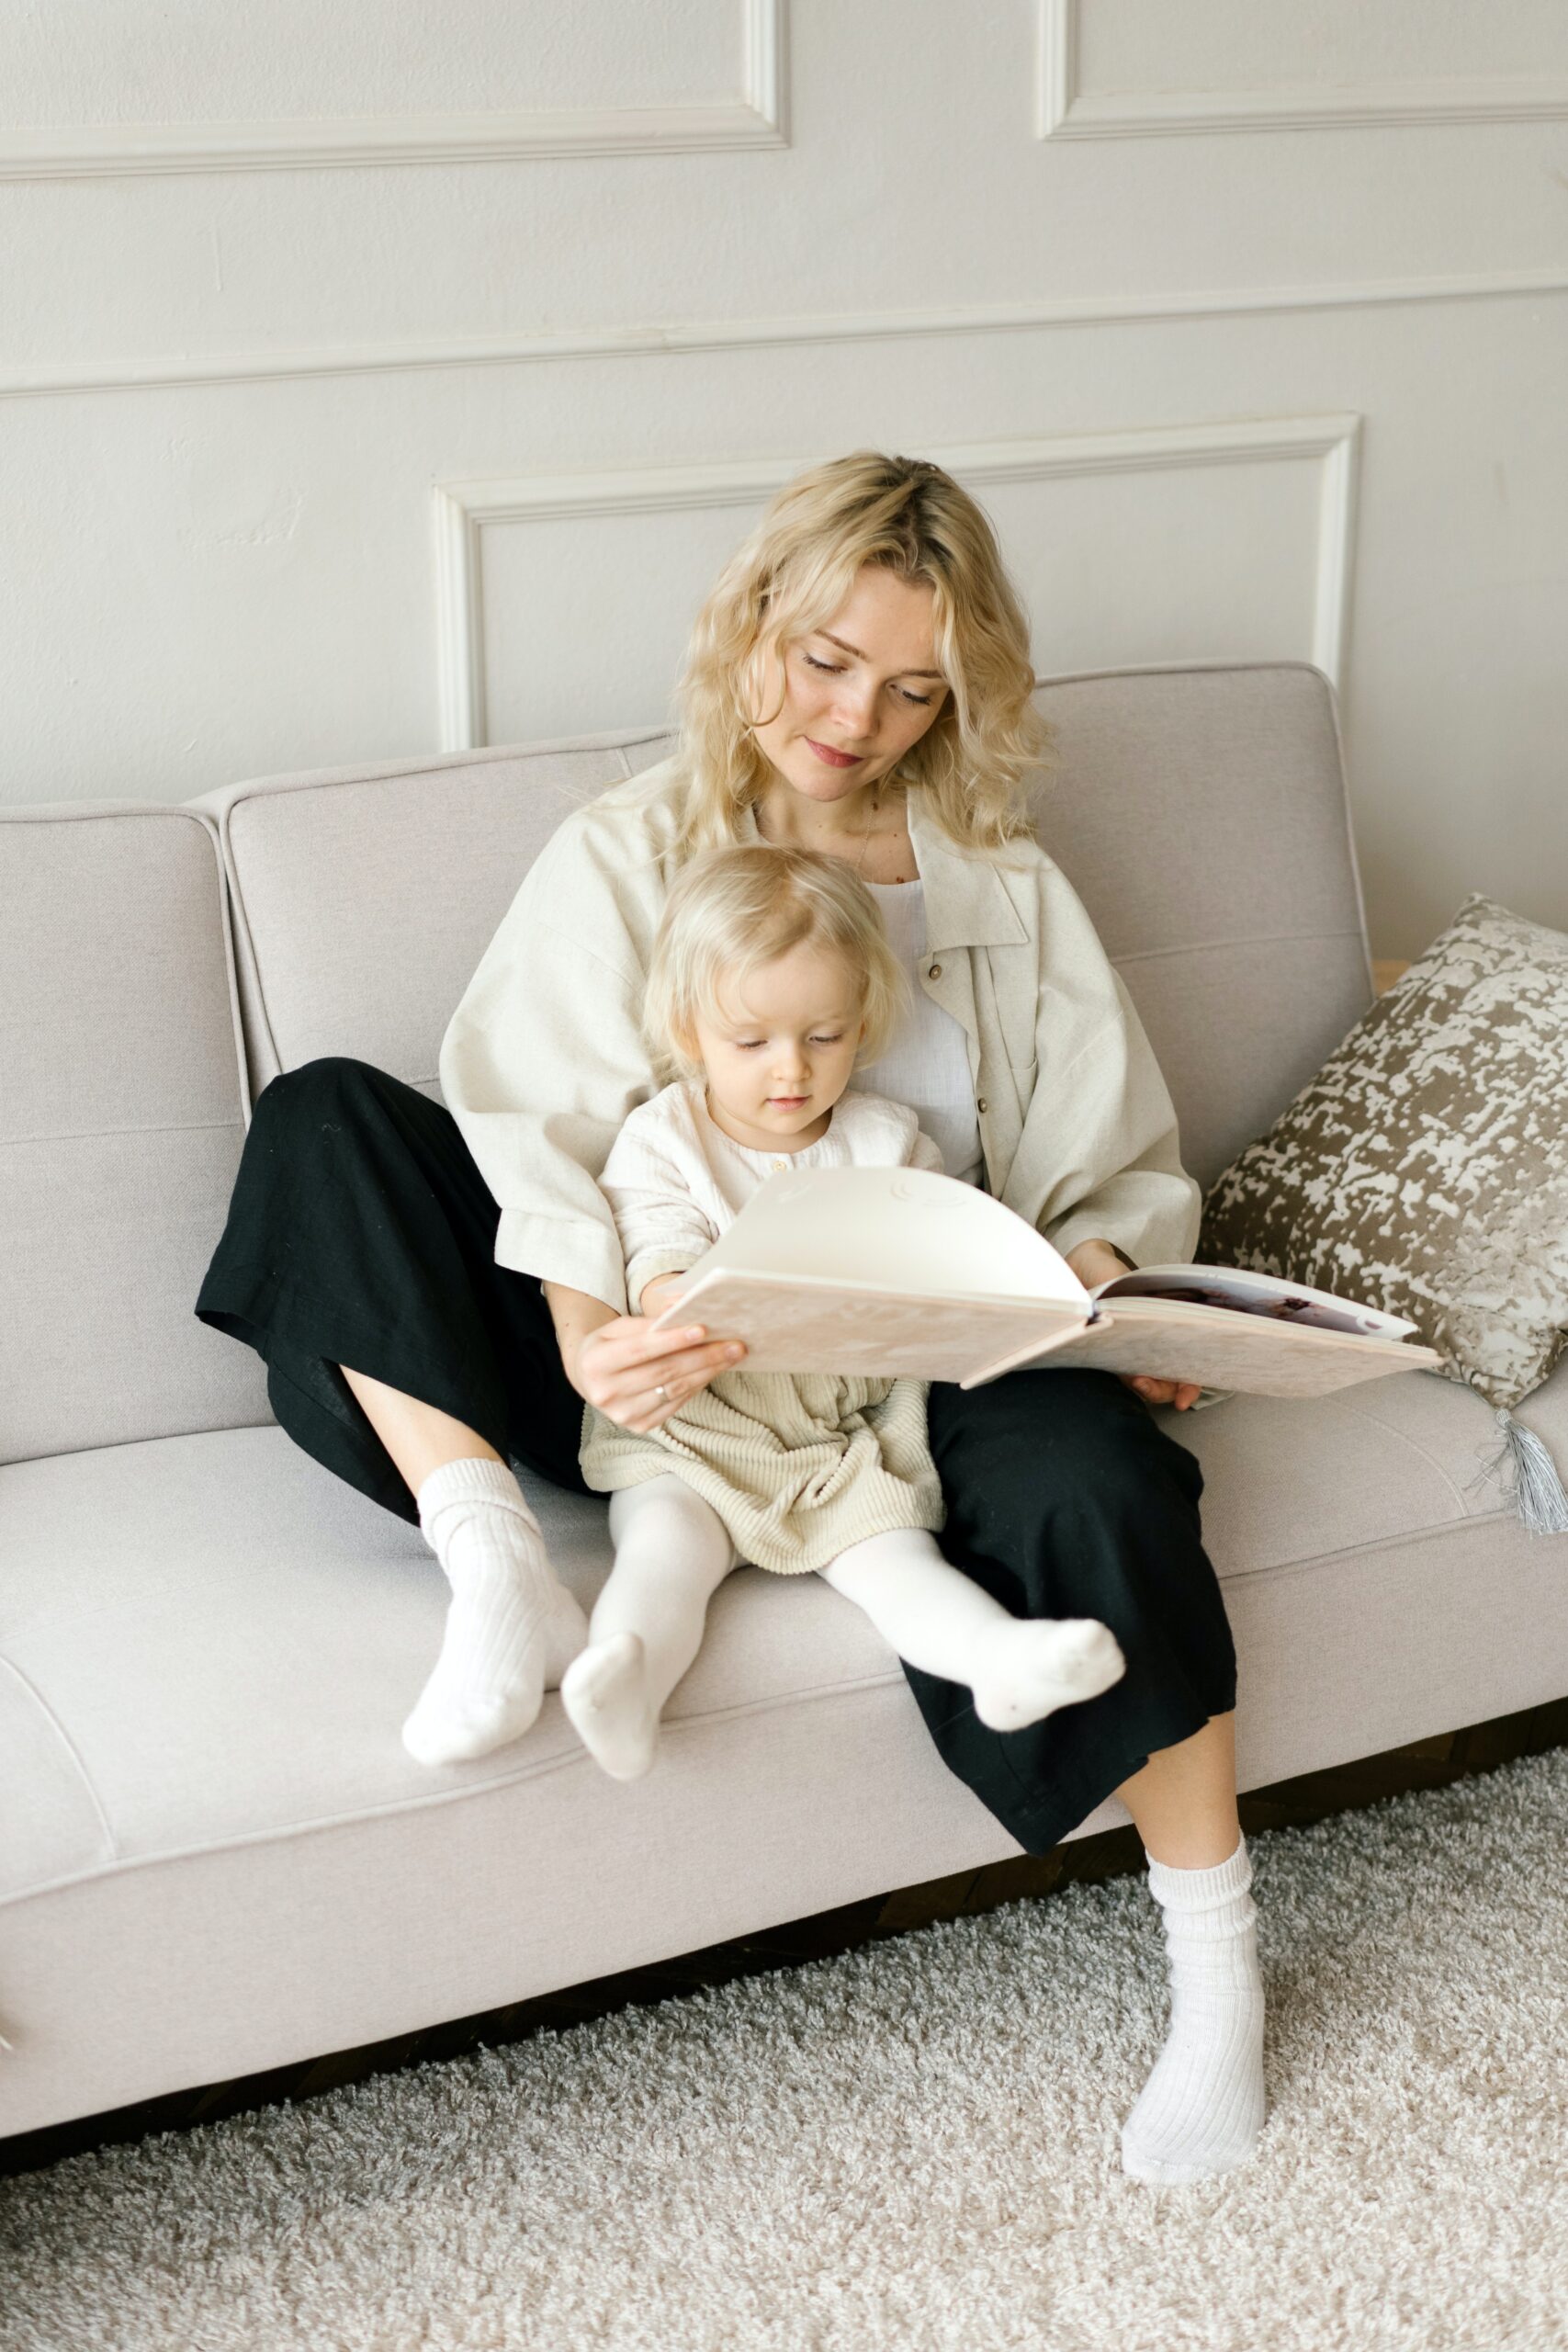 12 Ways to Make Money As a Stay at Home Mom